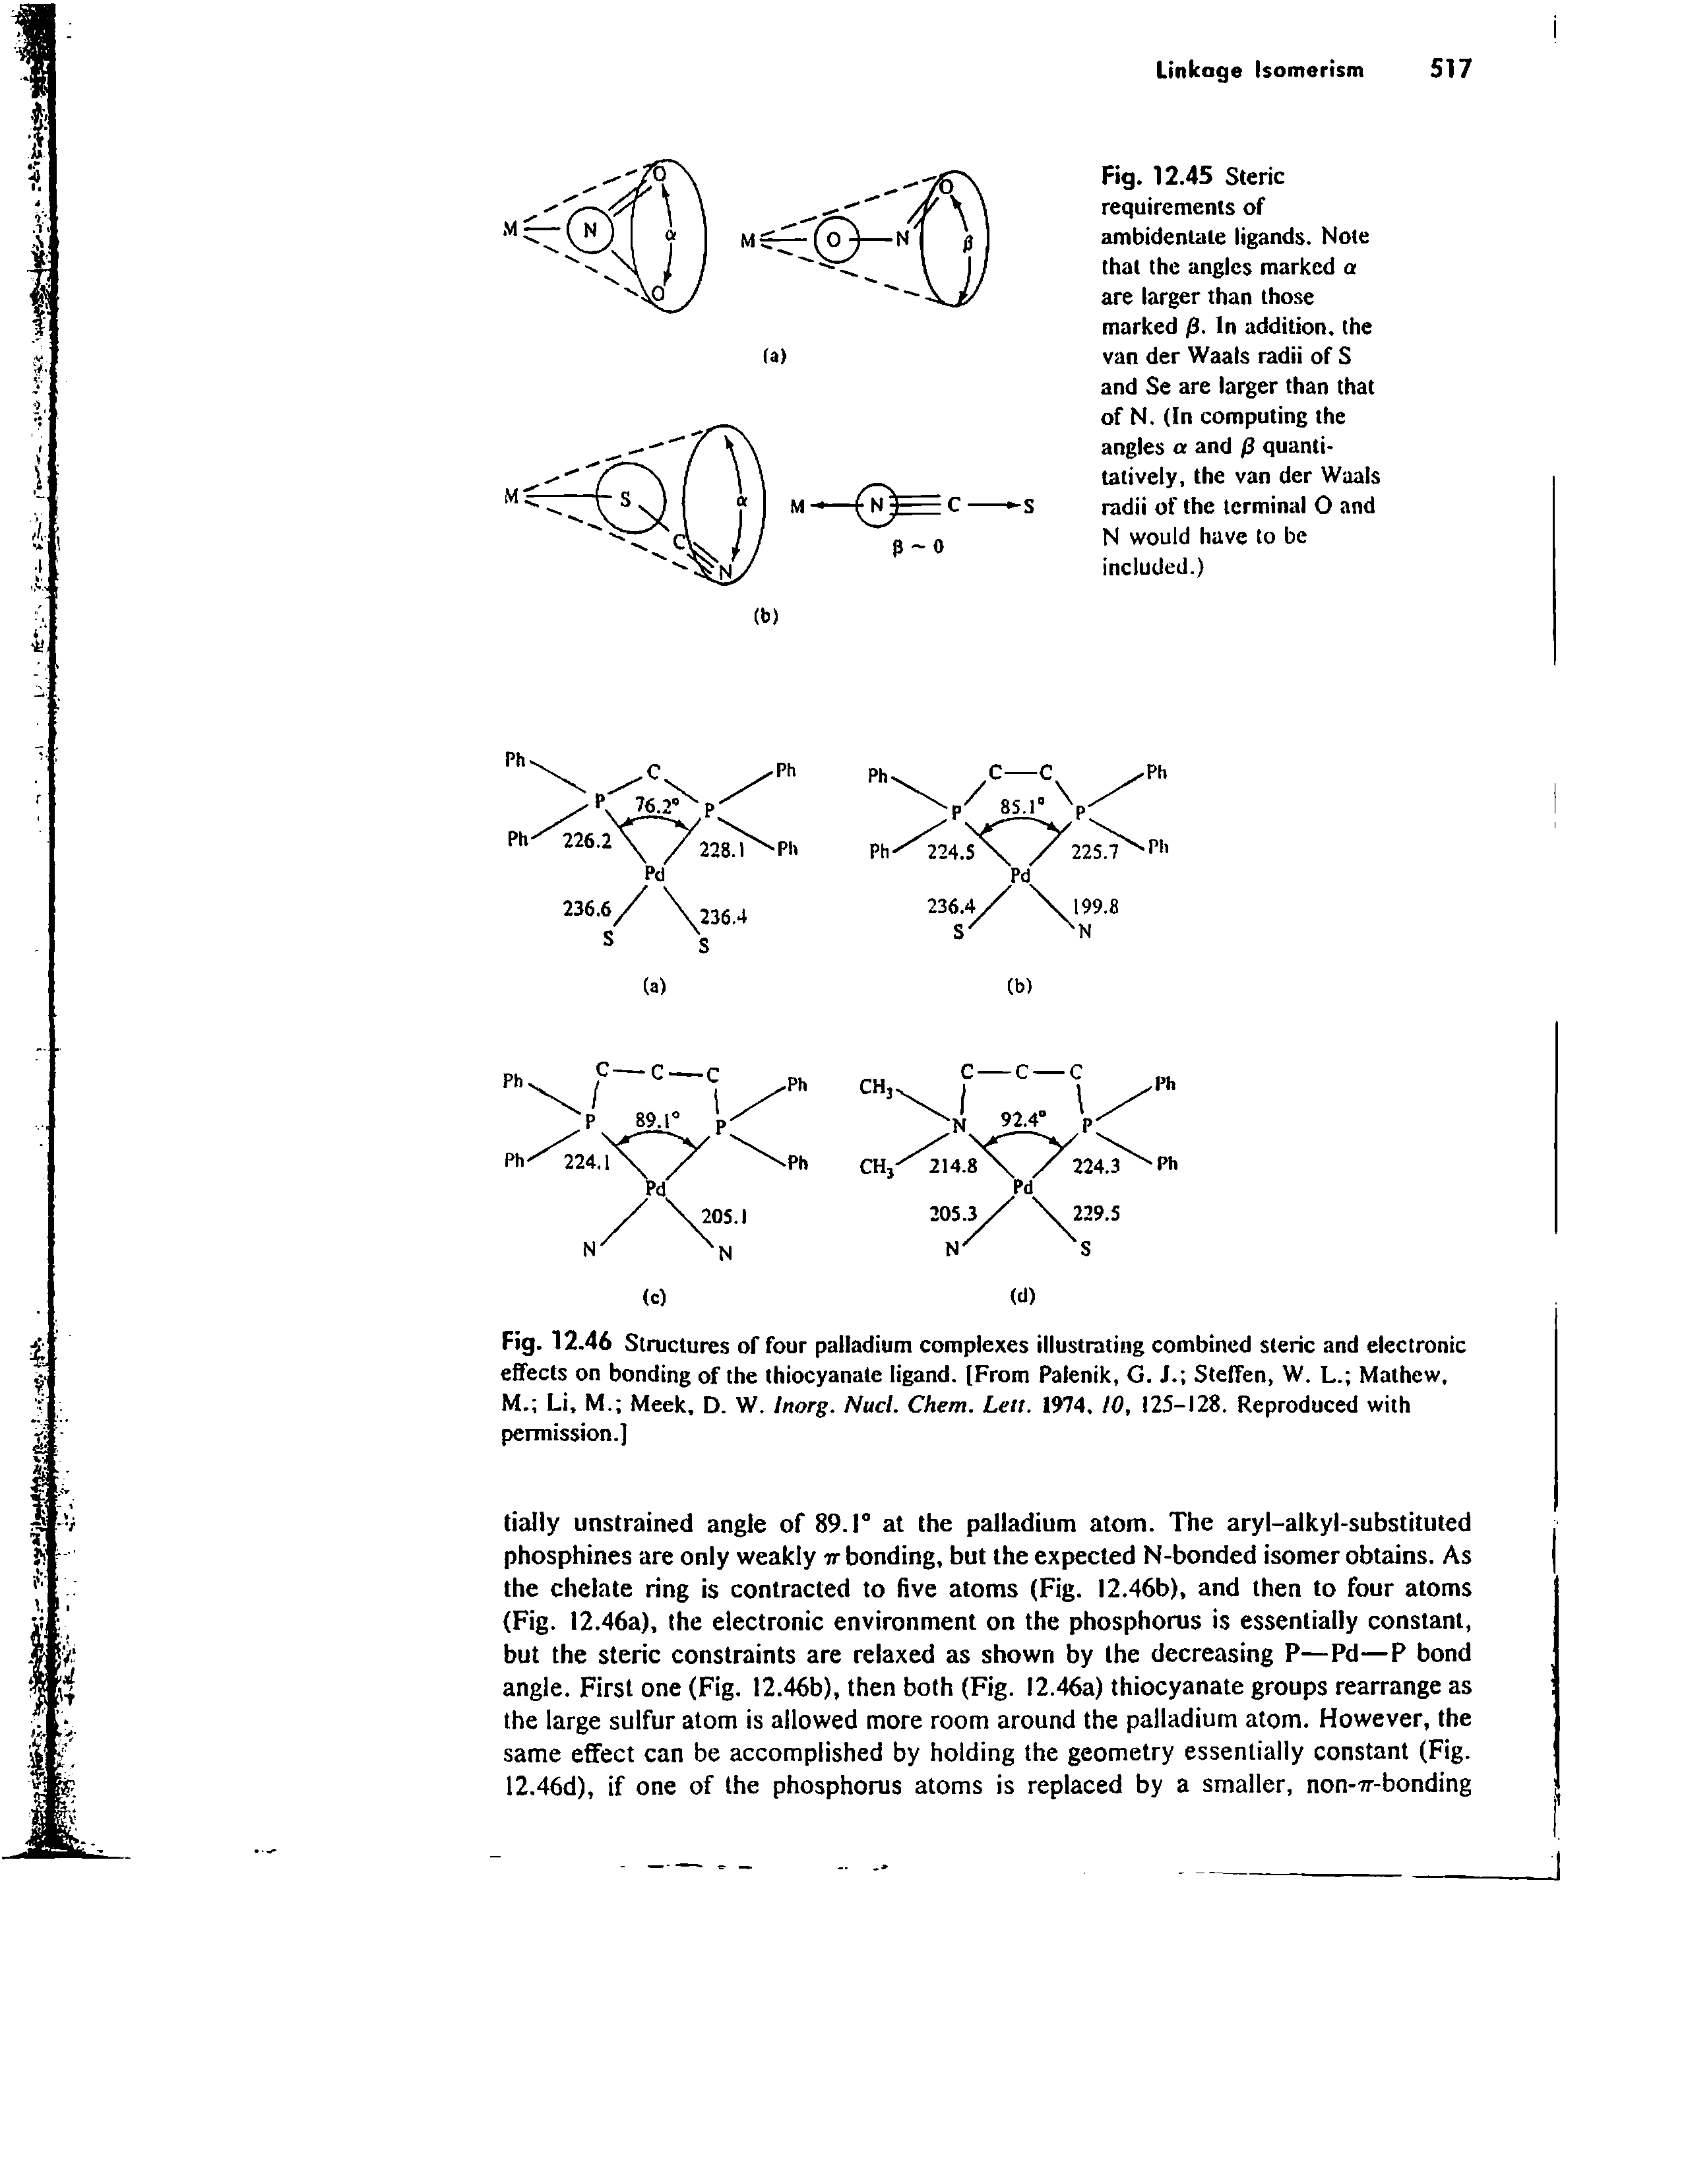 Fig. 12.46 Structures of four palladium complexes illustrating combined steric and electronic effects on bonding of the thiocyanate ligand. [From Palenik, G. J. Steffen, W. L. Mathew, M. Li, M. Meek, D. W. Inorg. Nucl. Chem. Leu. 1974. 10, 125-128. Reproduced with permission.]...